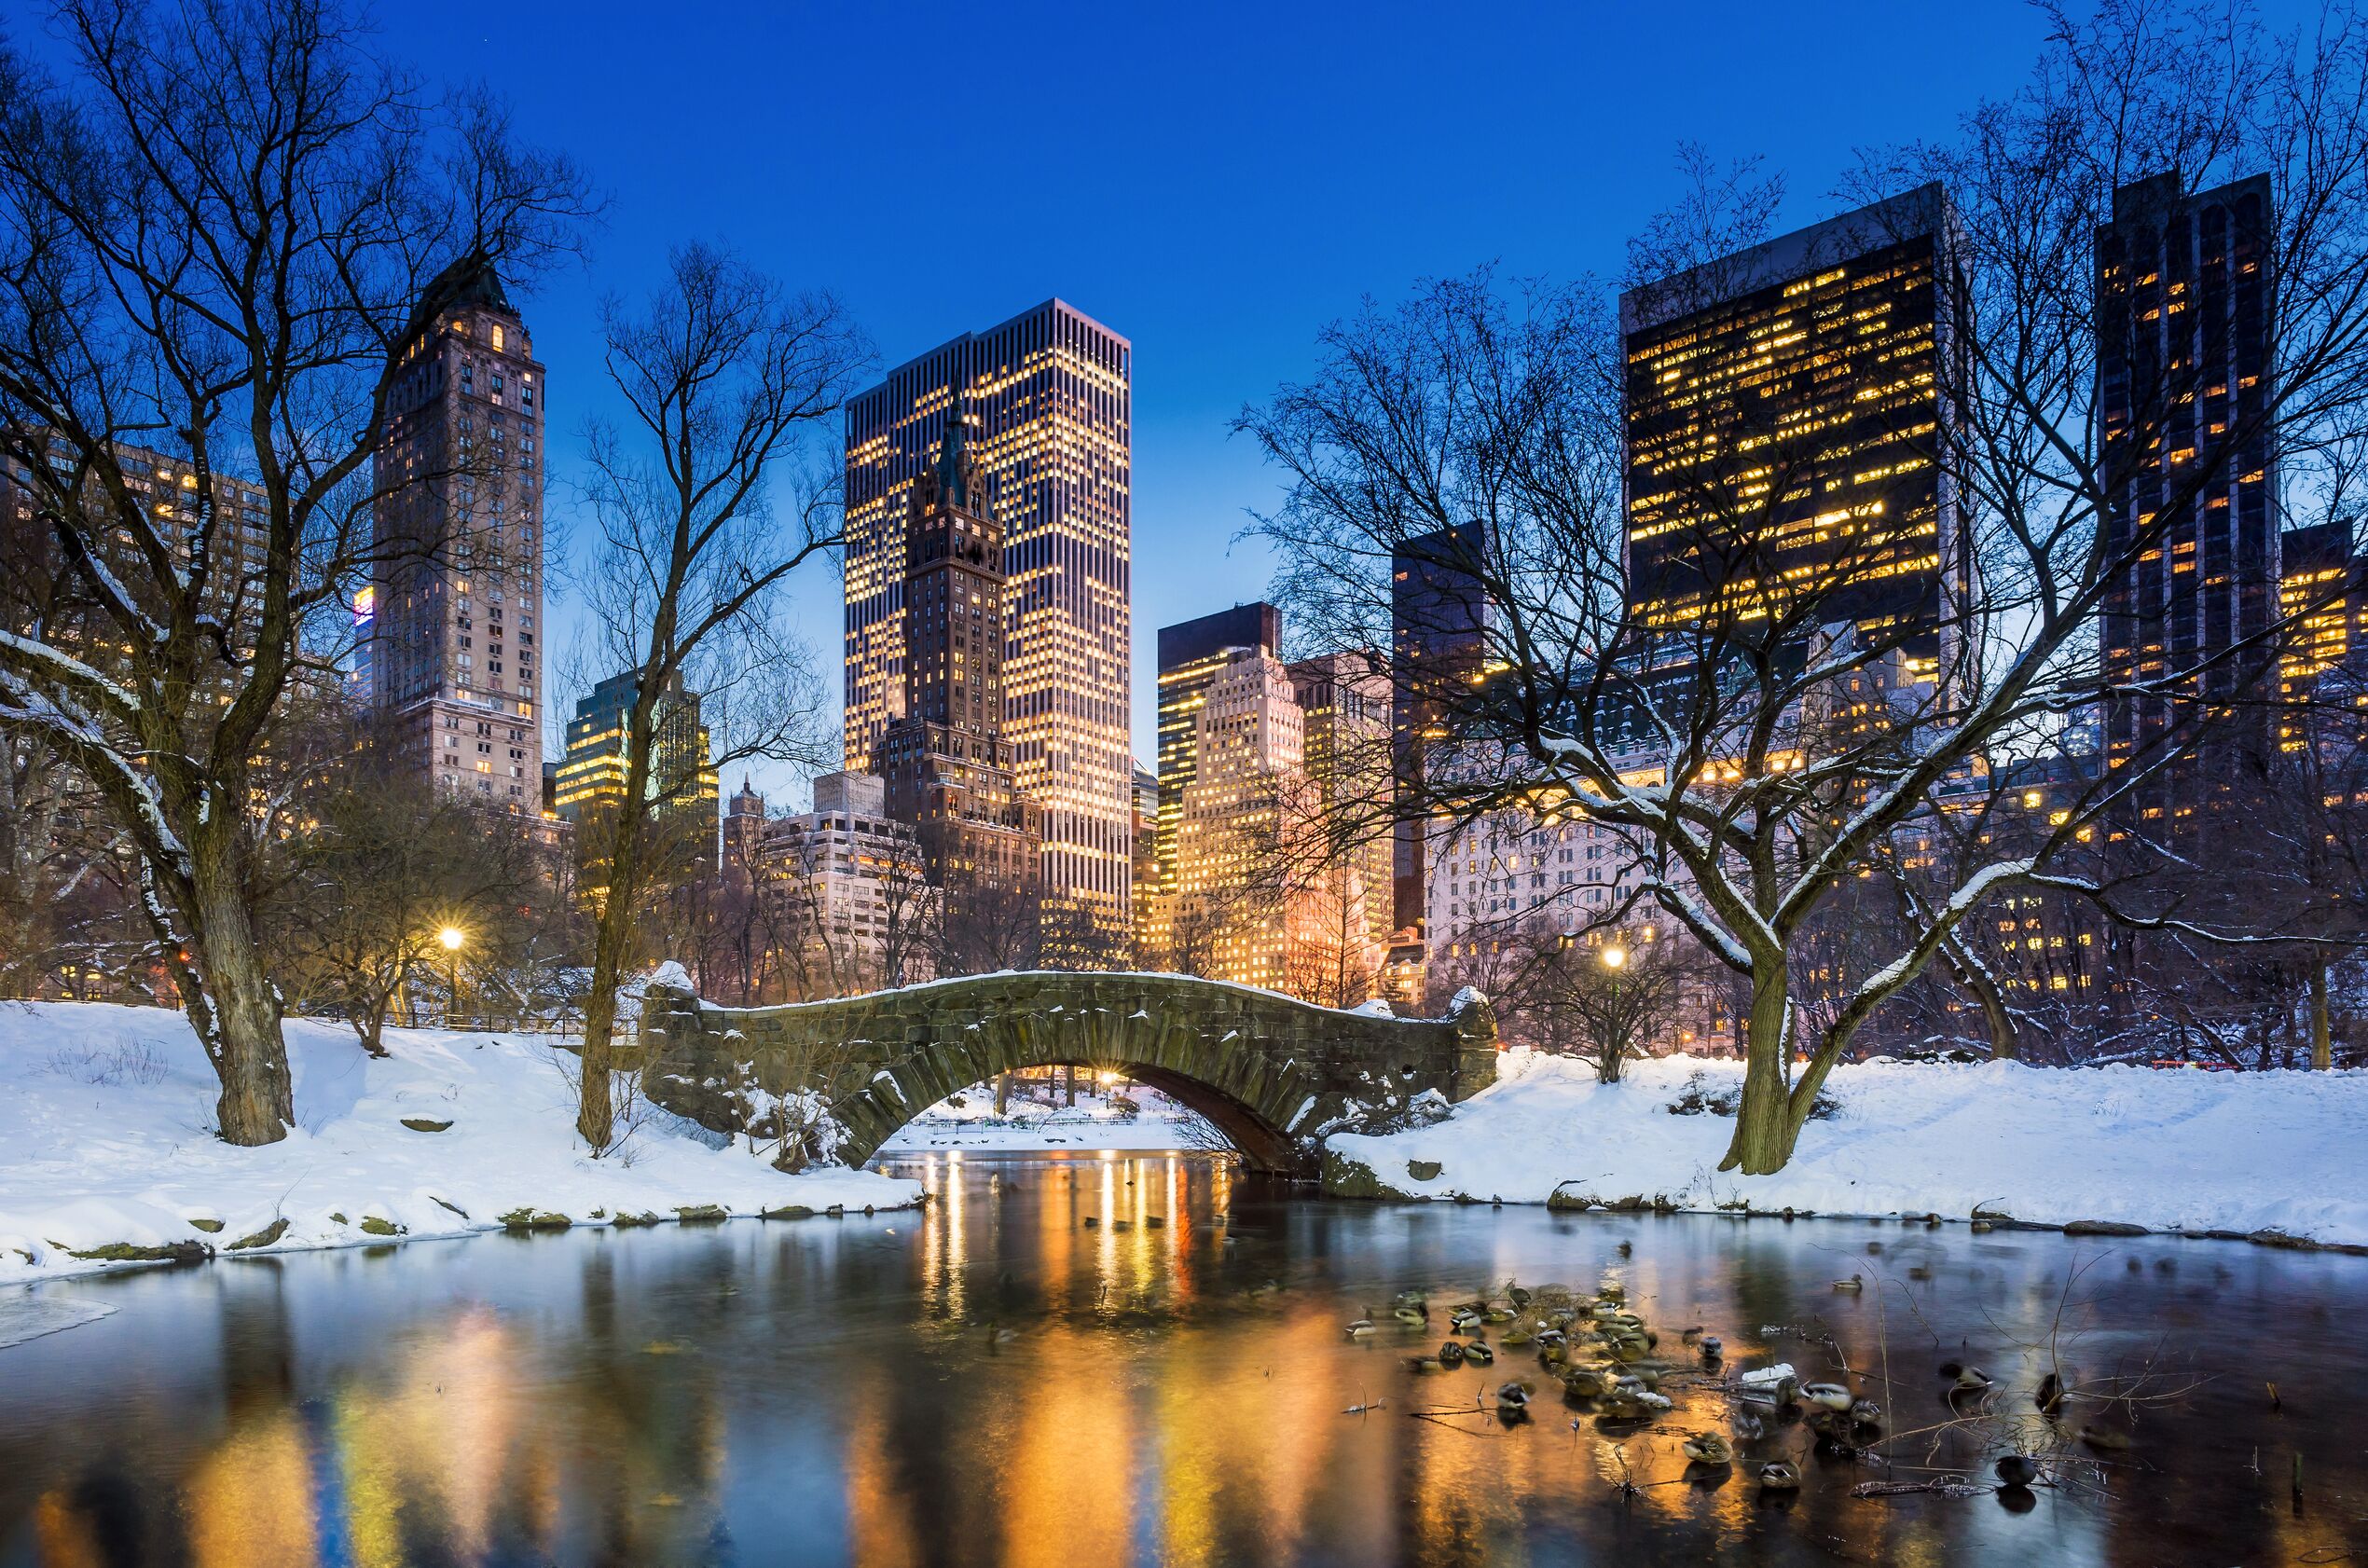 A stone bridge in Central Park at dusk, with snow opn the ground and the lights of the cuty building's reflected in the water